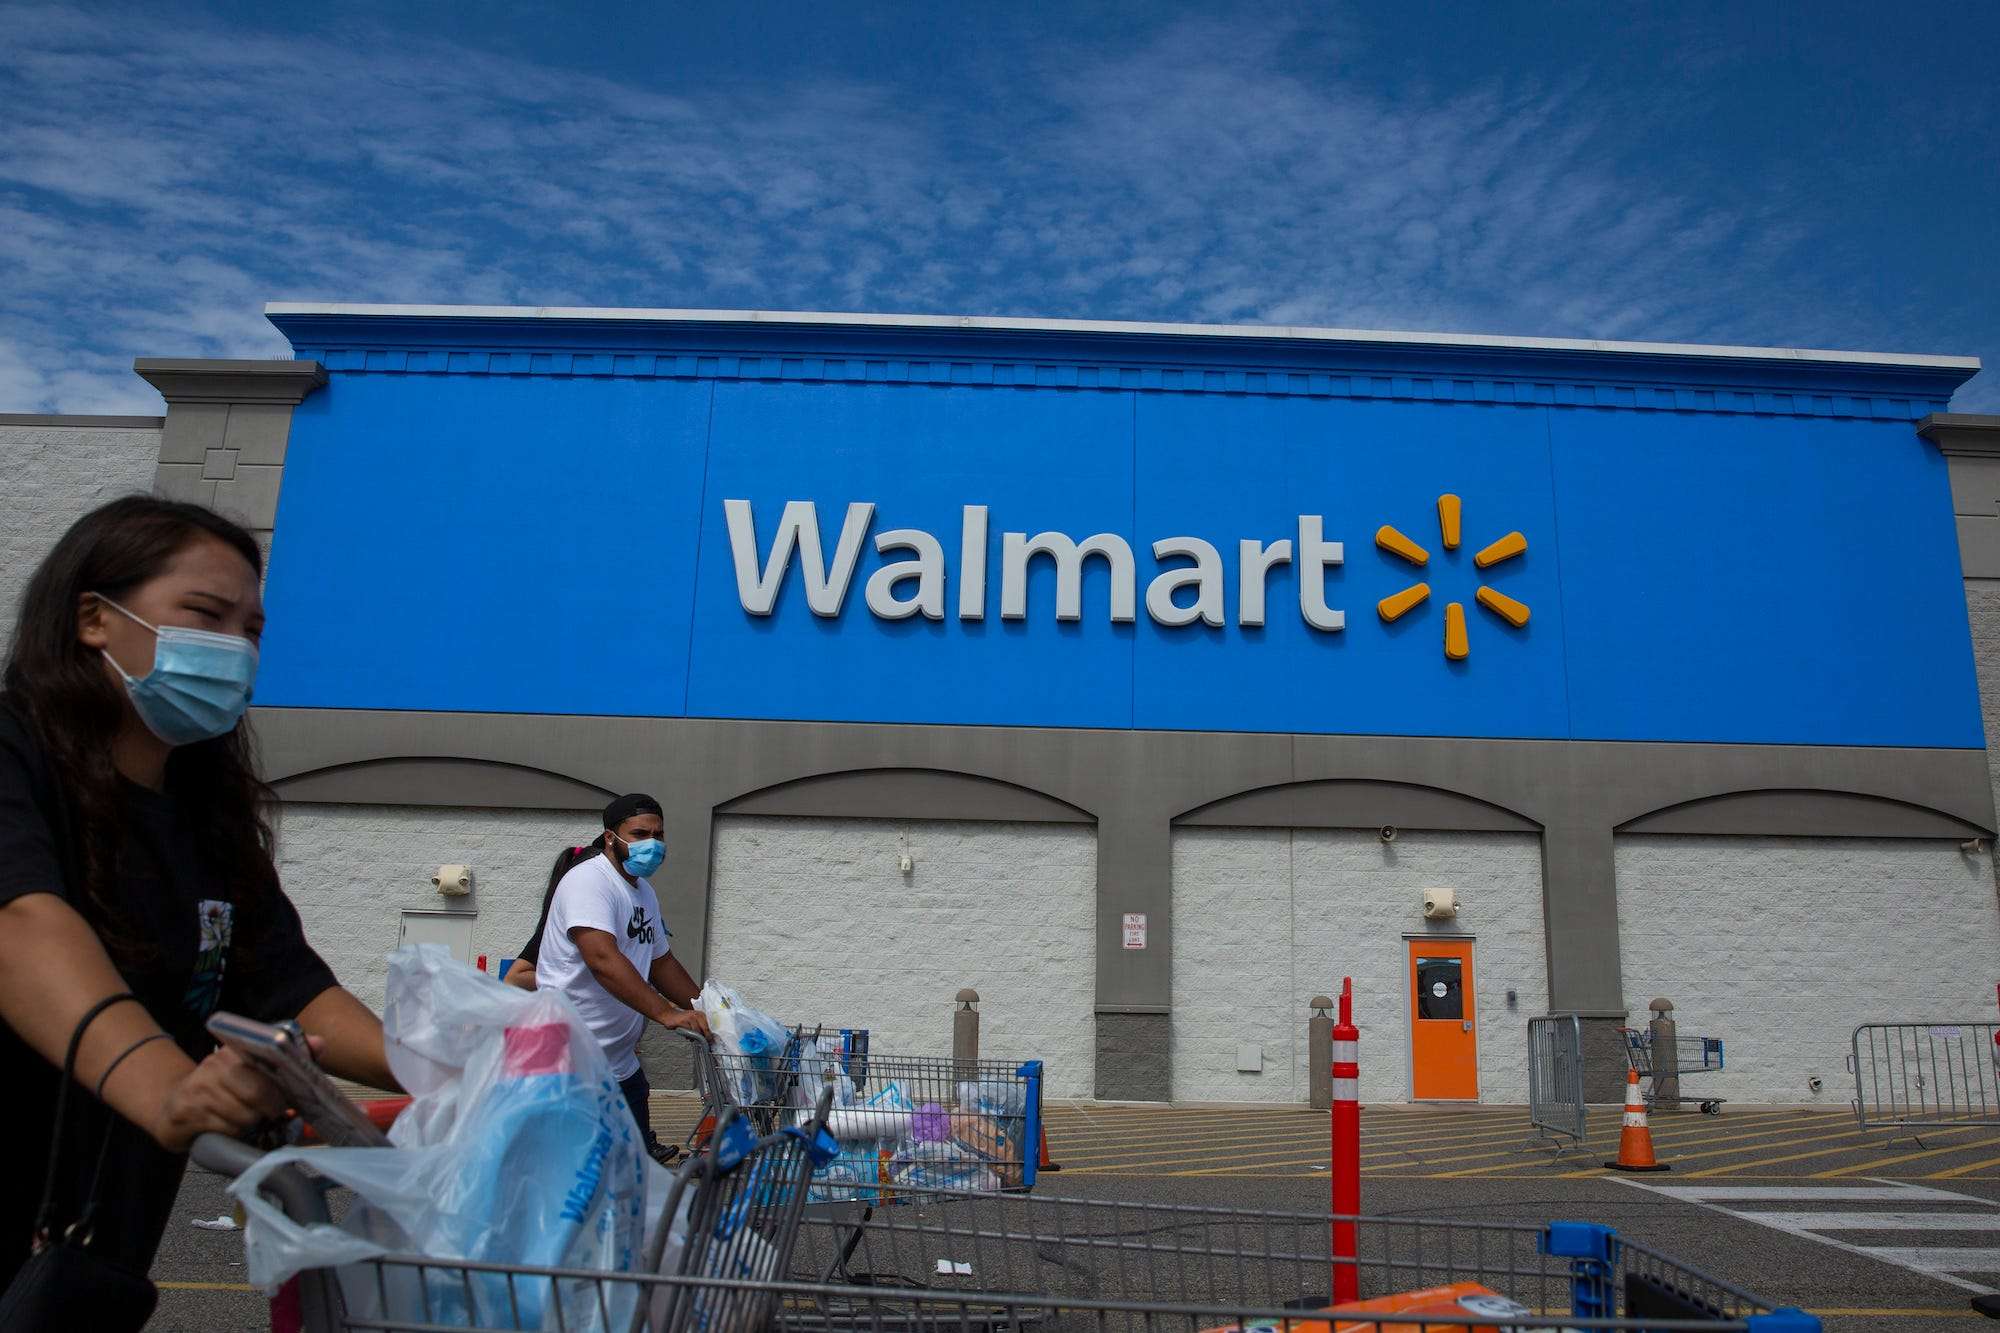 Walmart is preparing for a surge of holiday orders by adding ecommerce fulfillment centers to